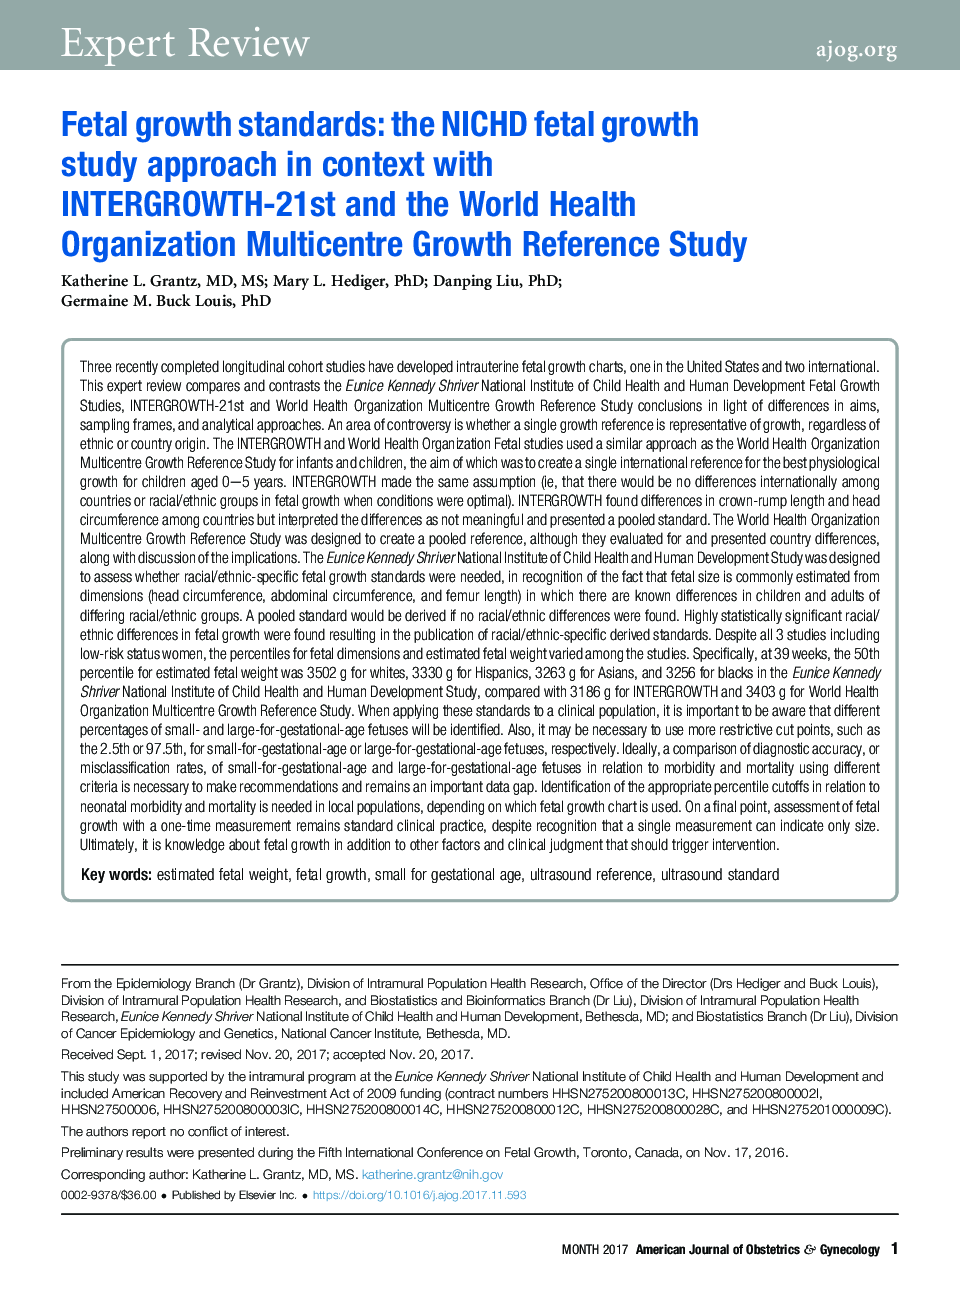 Fetal growth standards: the NICHD fetal growth study approach in context with INTERGROWTH-21st and the World Health Organization Multicentre Growth Reference Study